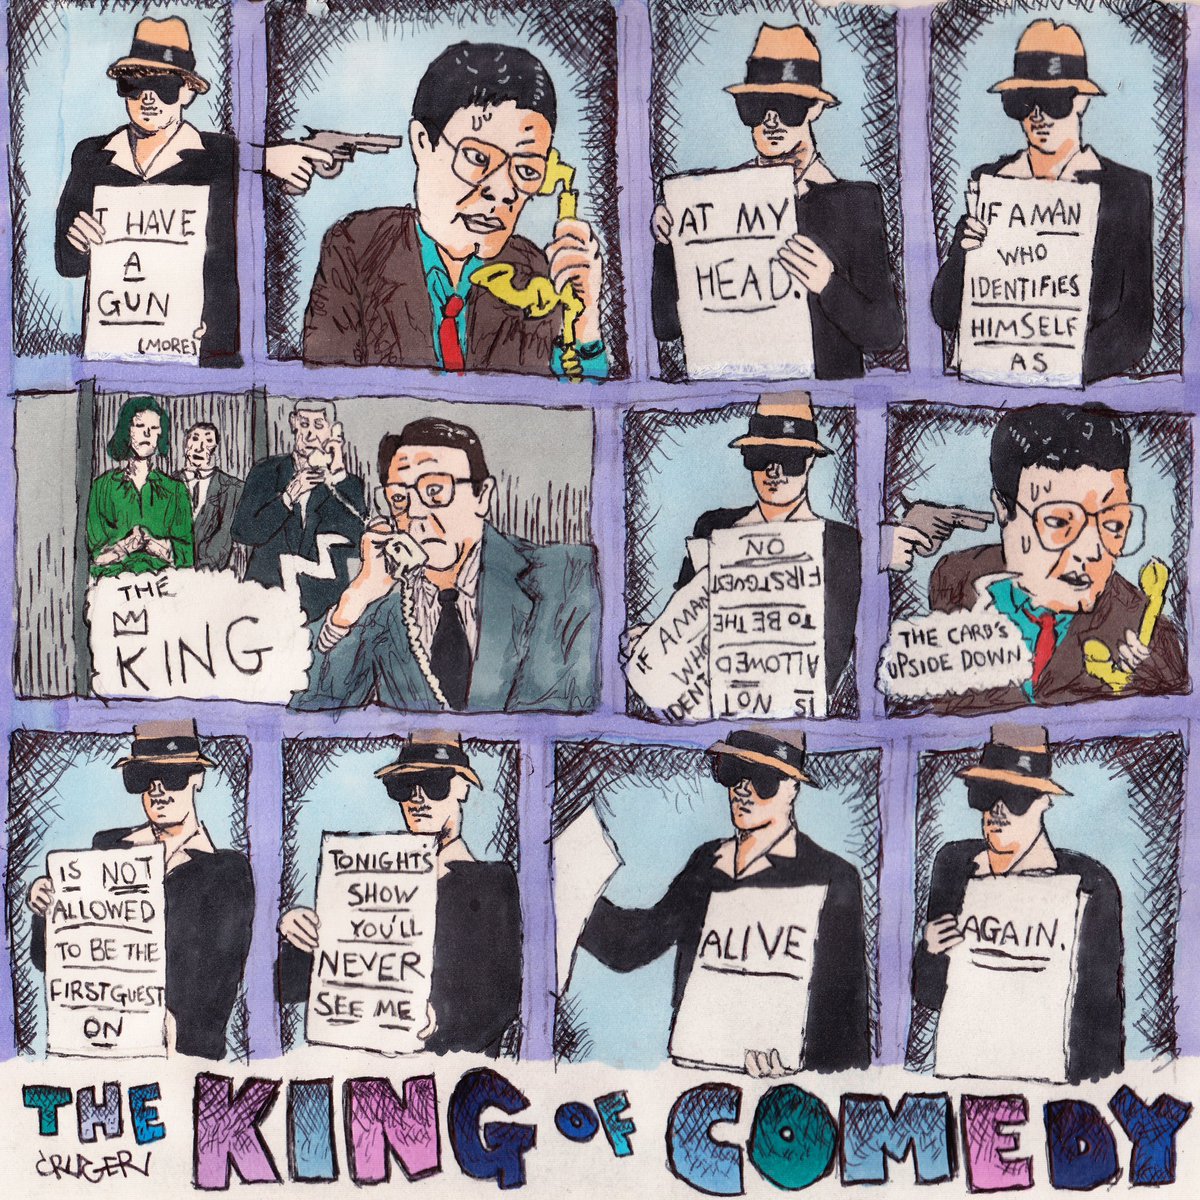 6. The King Of Comedy (1982)